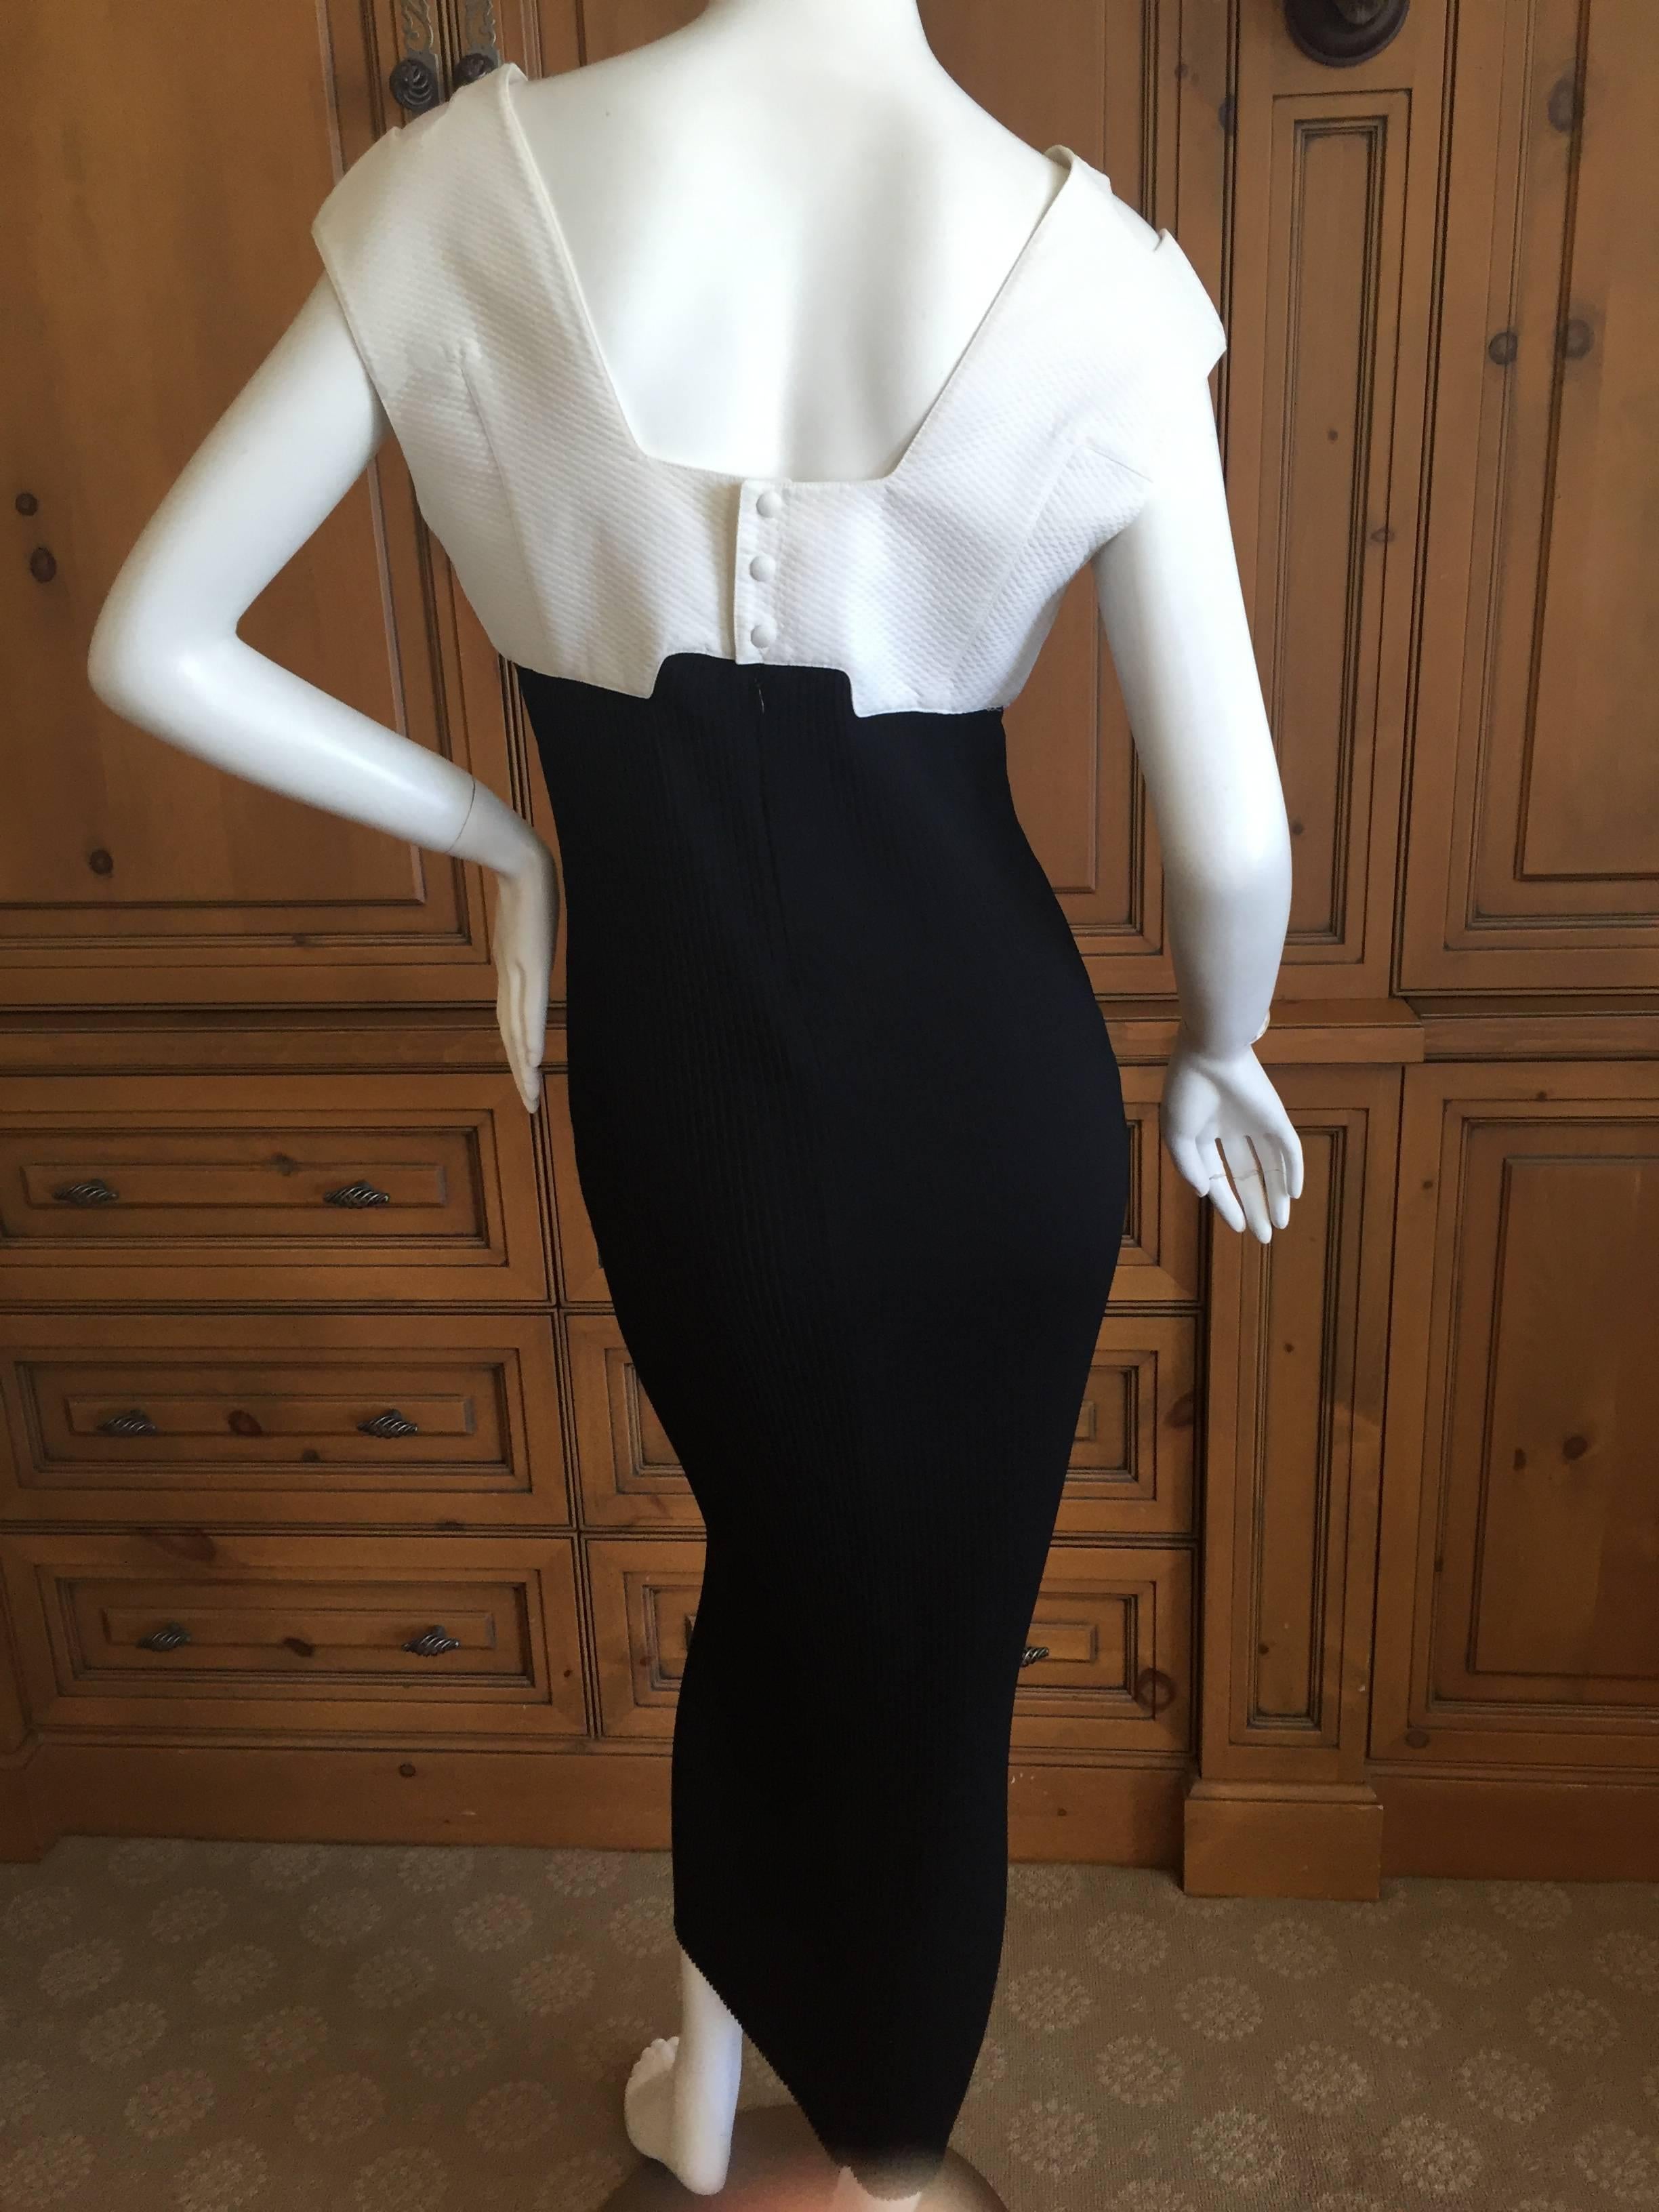 Thierry Mugler 1980's Sexy Low Cut Black & White Dress For Sale 1